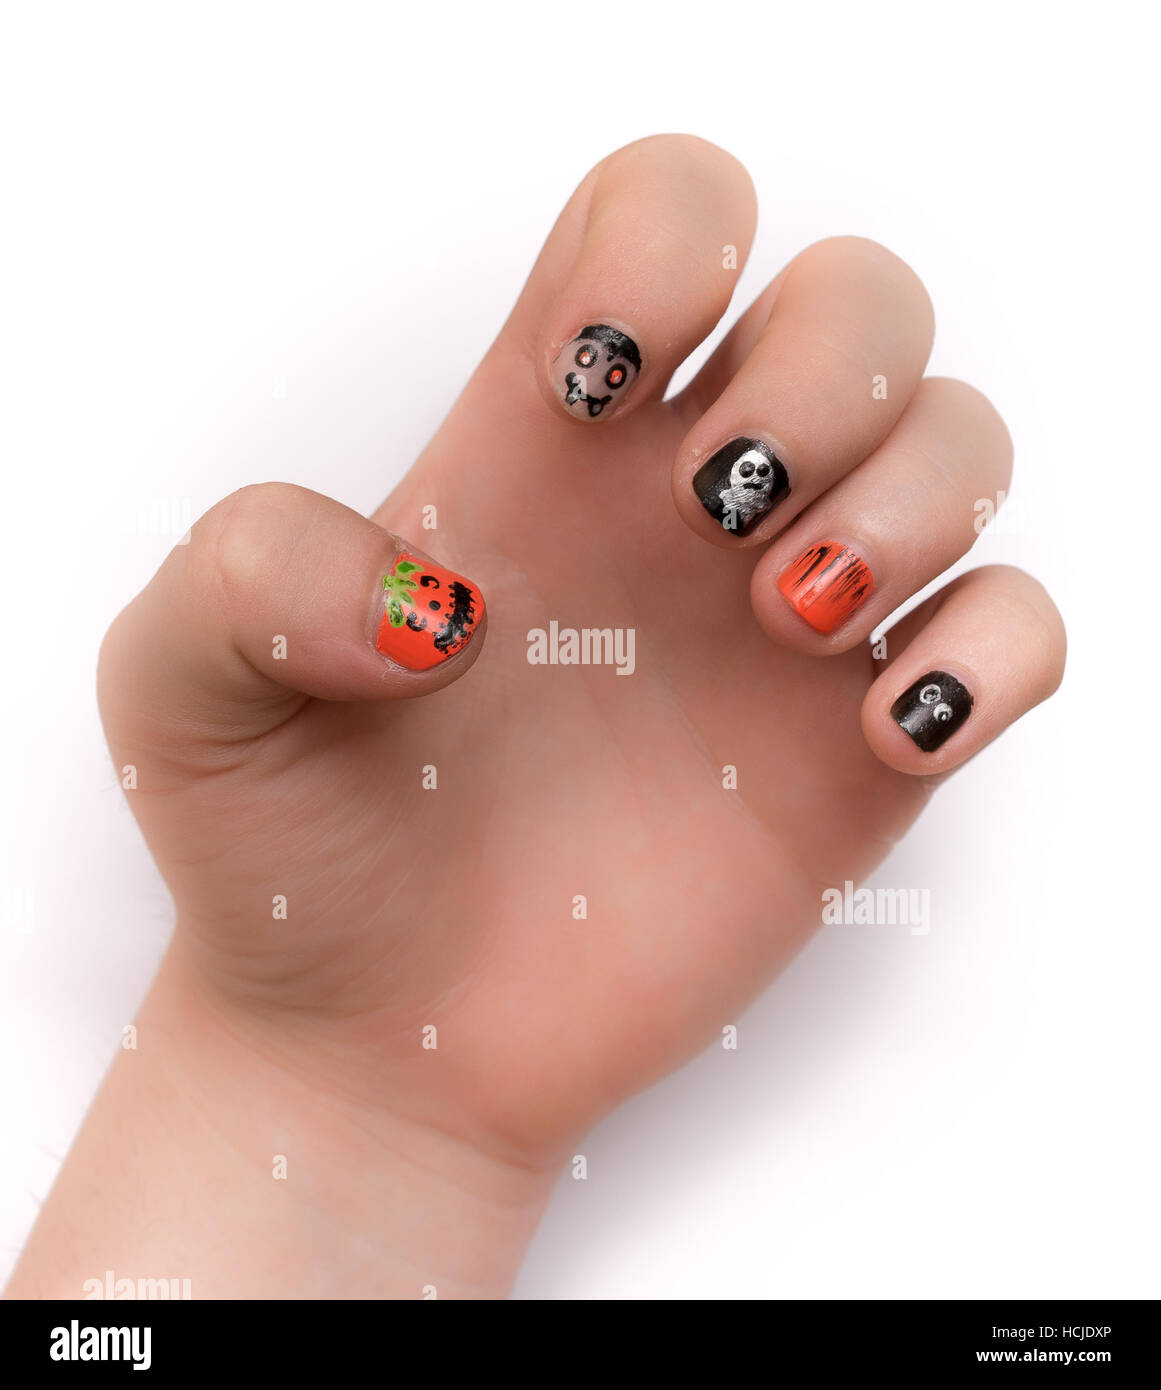 Young lady's fingernails painted artistically with Halloween icons and symbols, isolated on white Stock Photo